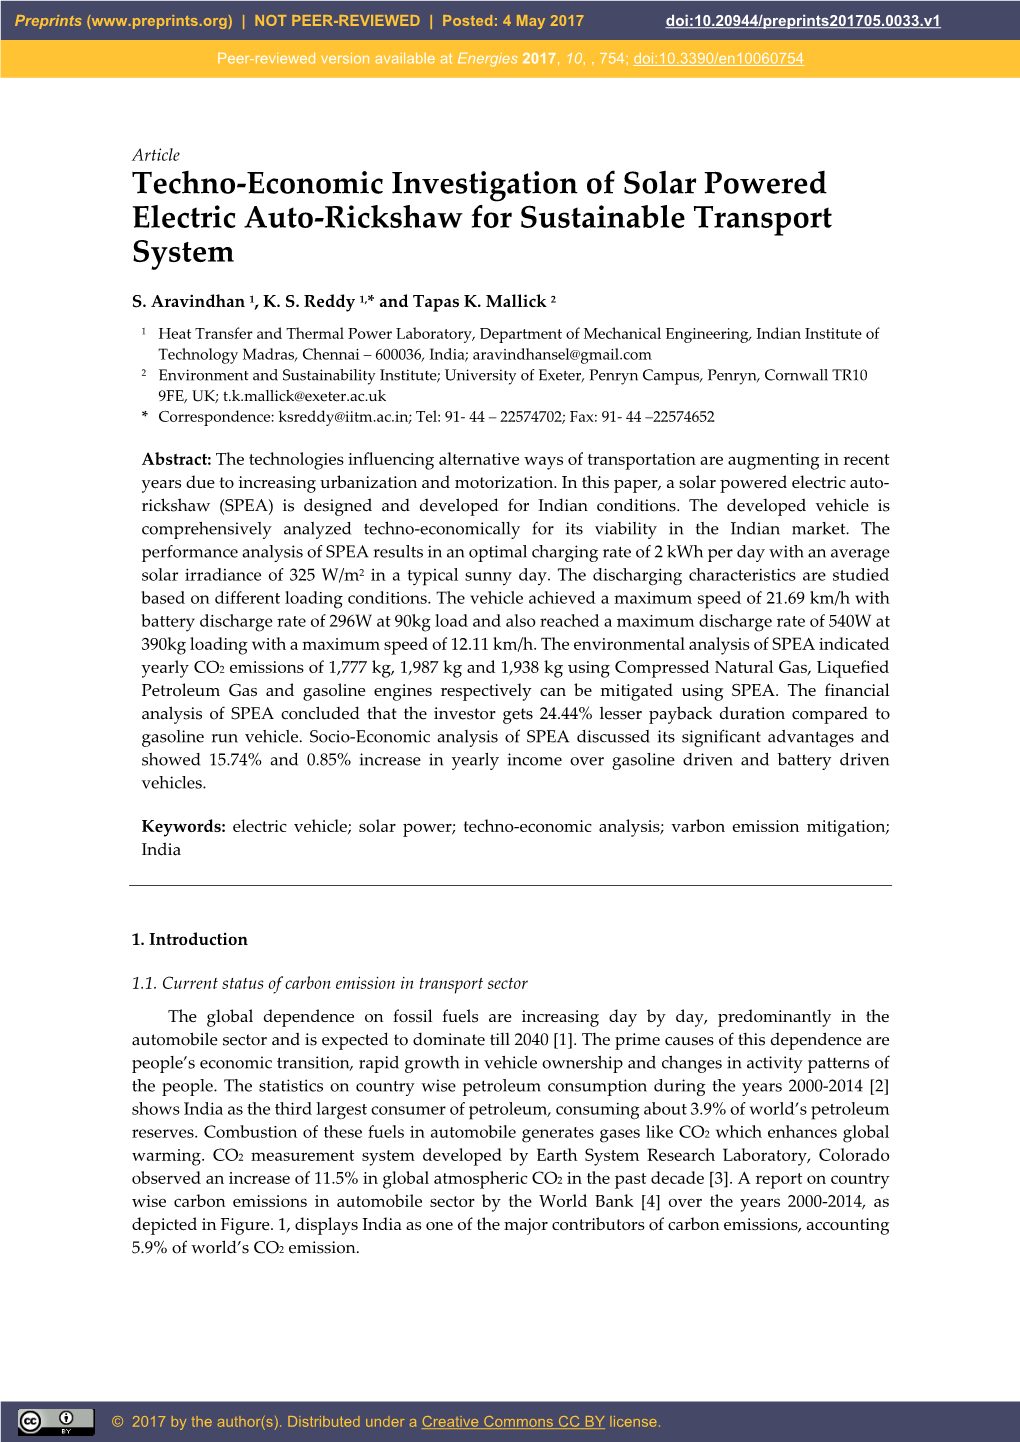 Techno-Economic Investigation of Solar Powered Electric Auto-Rickshaw for Sustainable Transport System